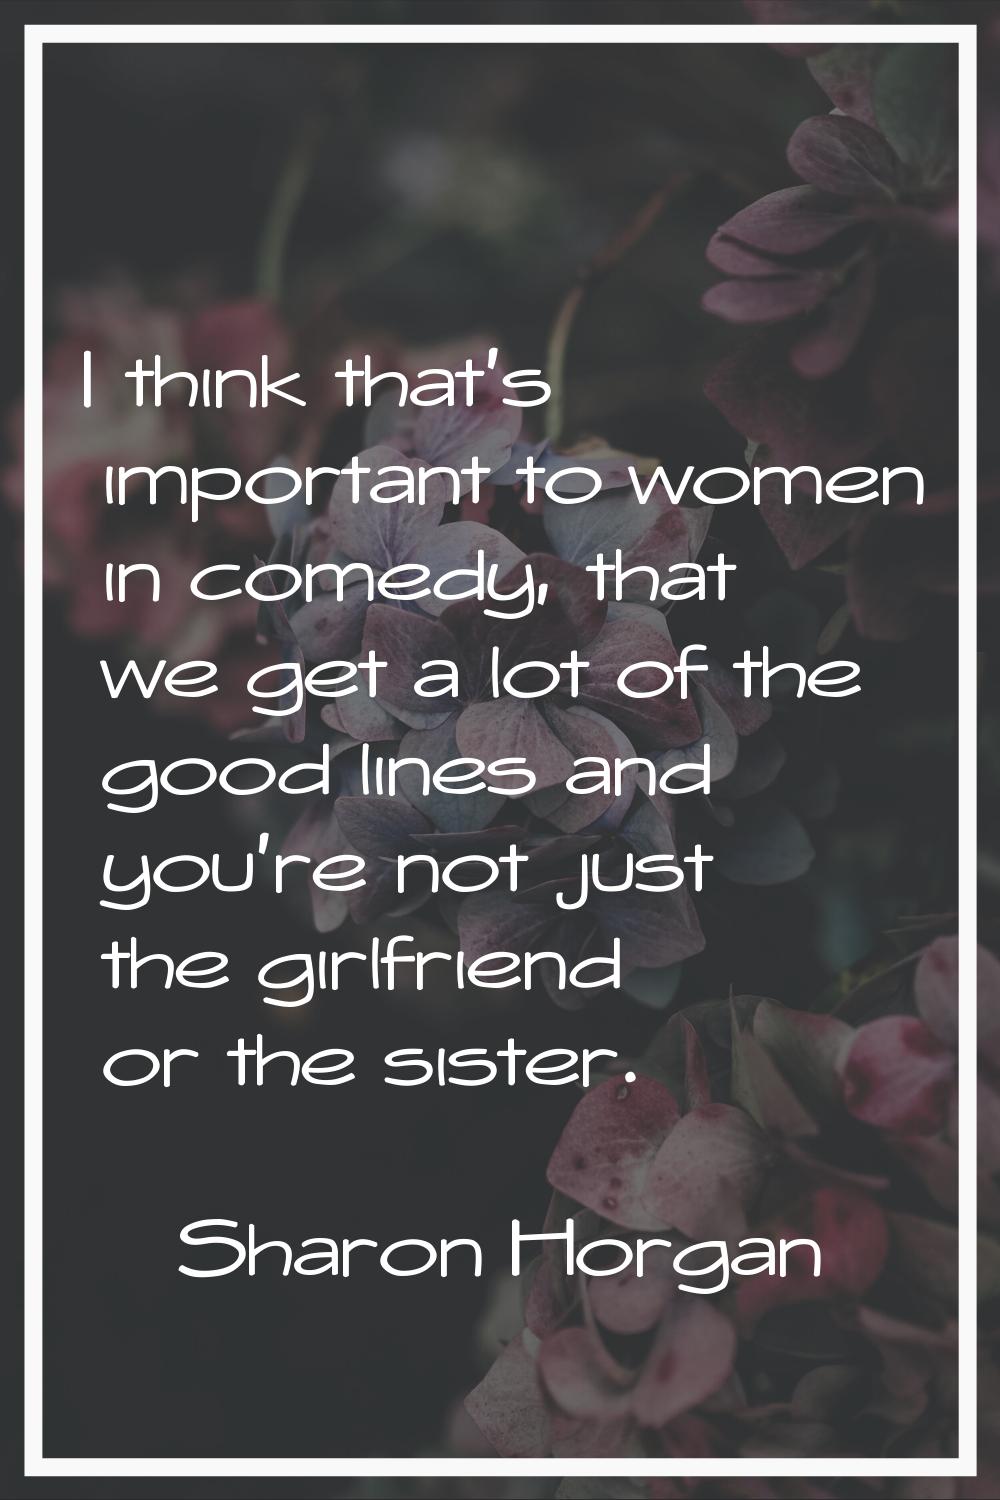 I think that's important to women in comedy, that we get a lot of the good lines and you're not jus